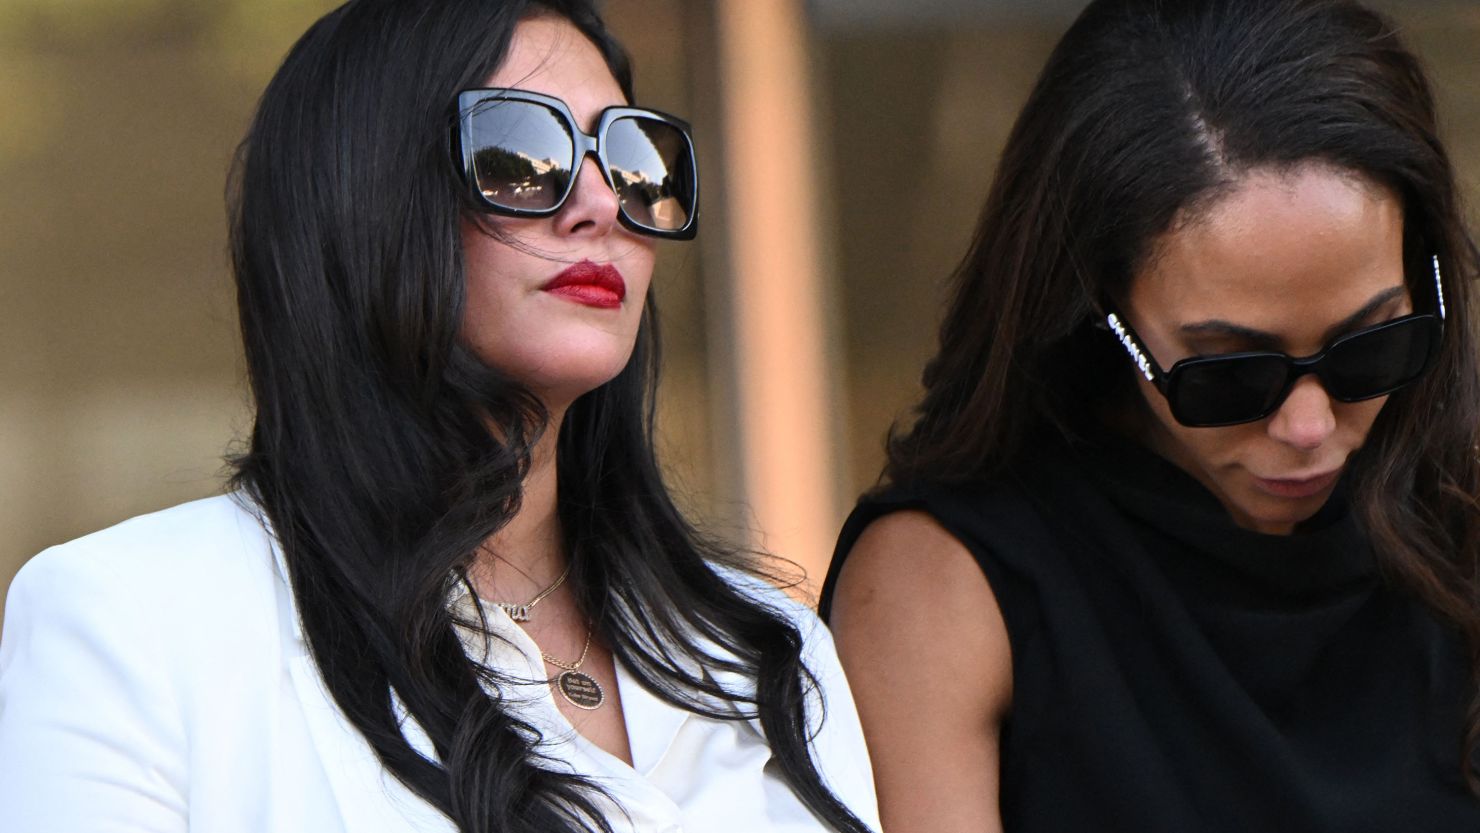 Vanessa Bryant, wife of the late Los Angeles Lakers basketball player Kobe Bryant, and close friend Sydney Leroux (R) depart the court house in Los Angeles, California, on August 24, 2022.